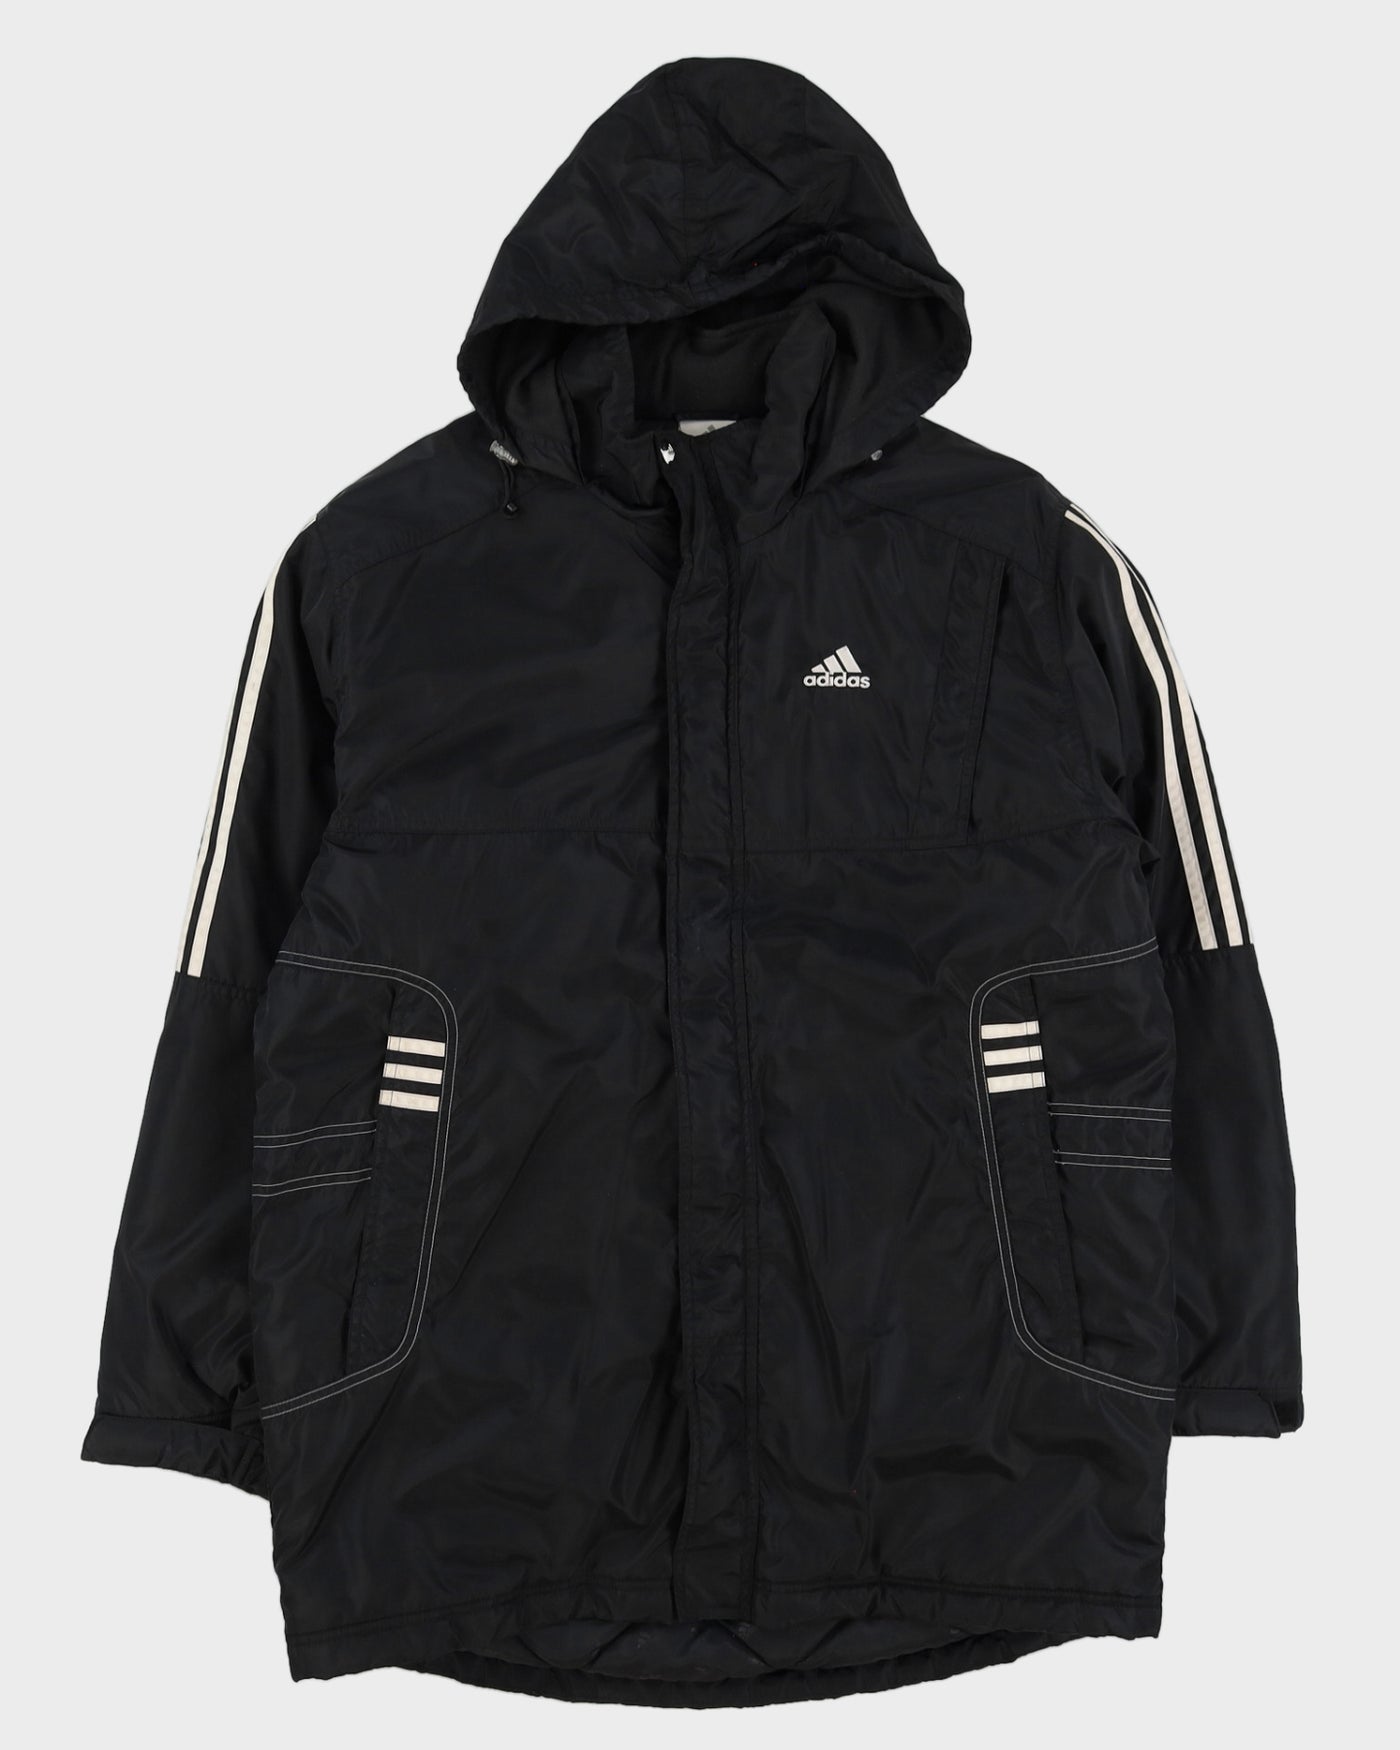 00s Adidas Black Jacket With Embroidery On The Back - L